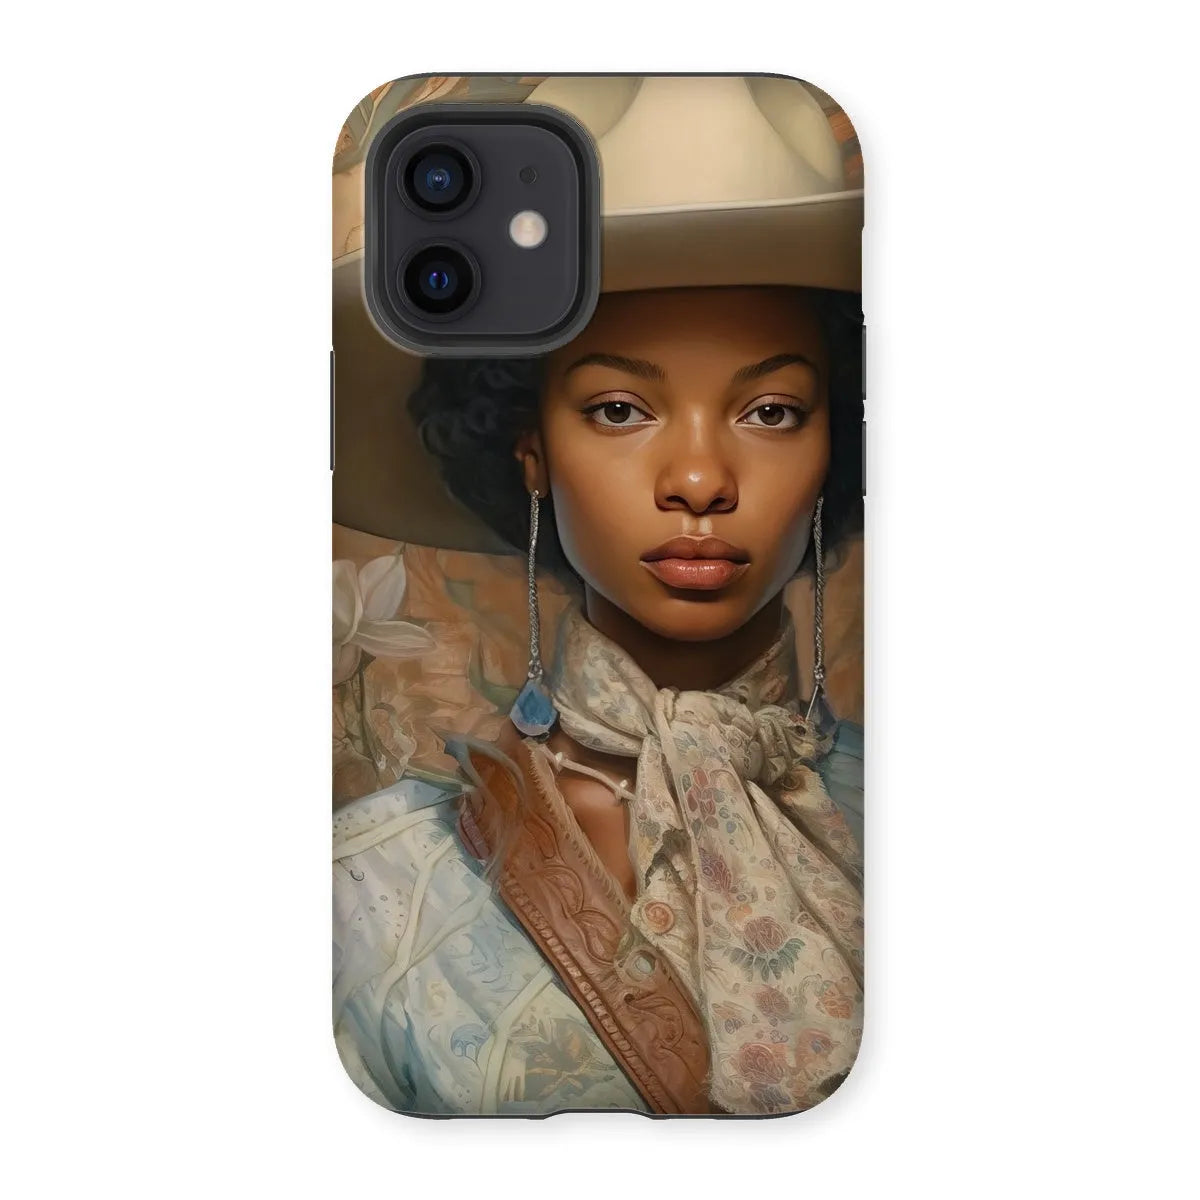 Imani The Lesbian Cowgirl - Sapphic Art Phone Case - Iphone 12 / Matte - Mobile Phone Cases - Aesthetic Art